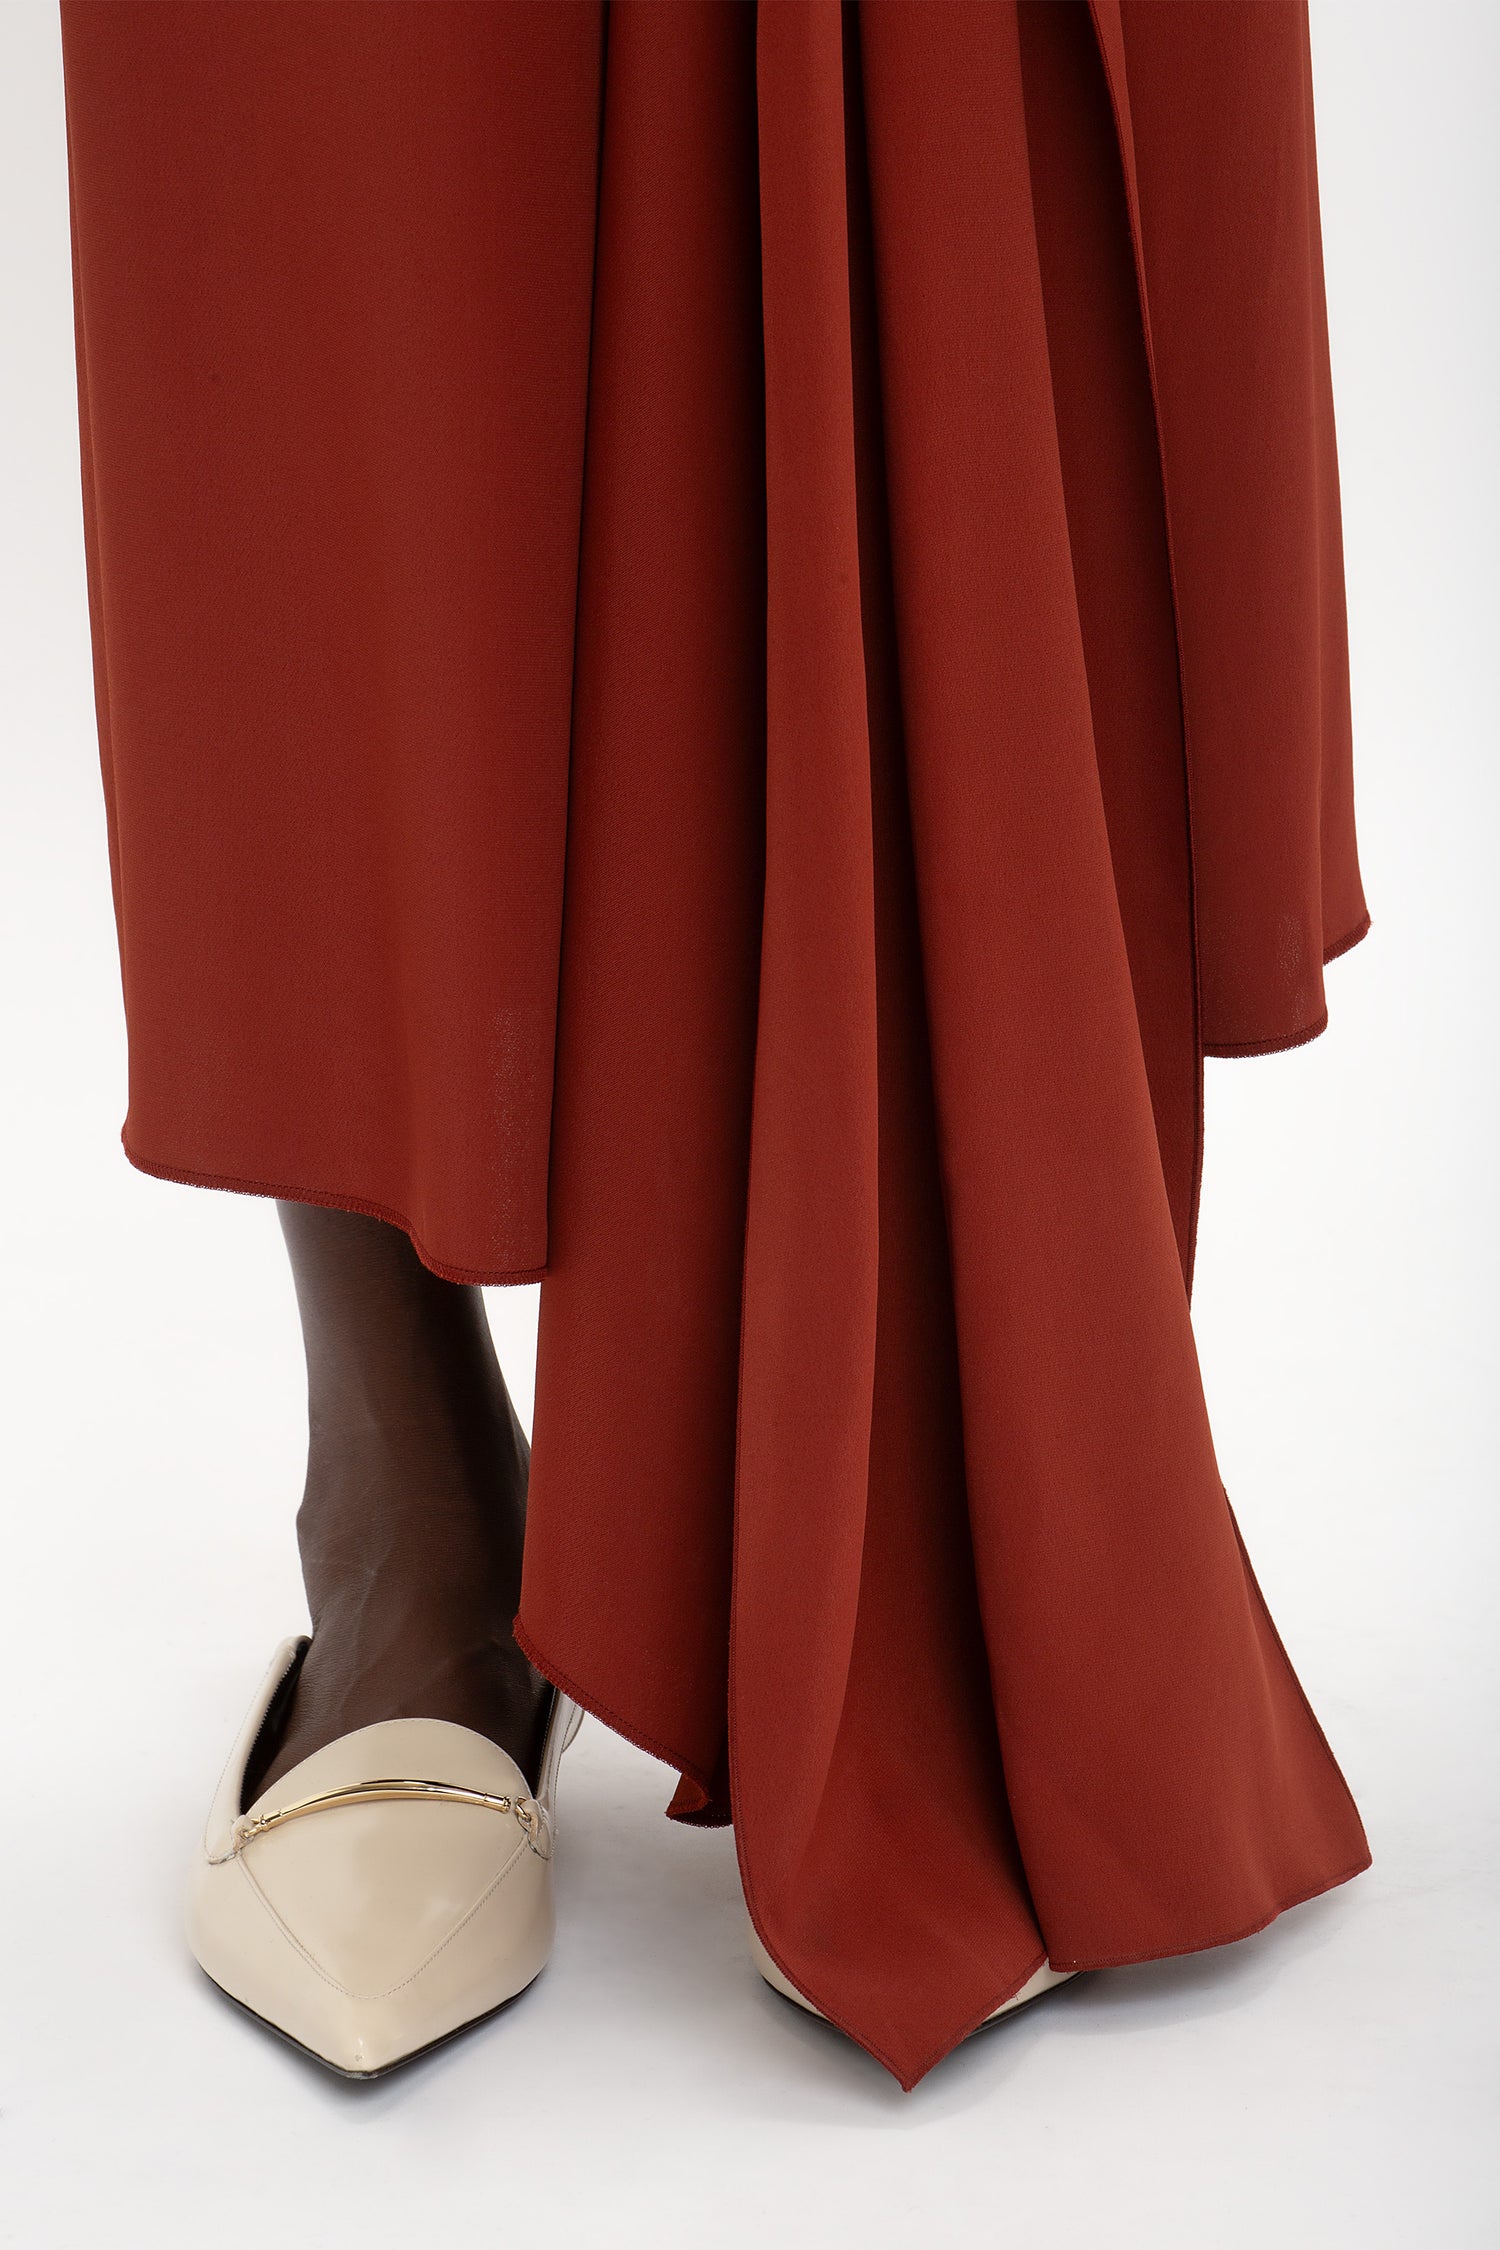 Close-up of a person wearing the Victoria Beckham High Neck Tie Detail Dress In Russet with an asymmetric hemline and beige pointed-toe flats.